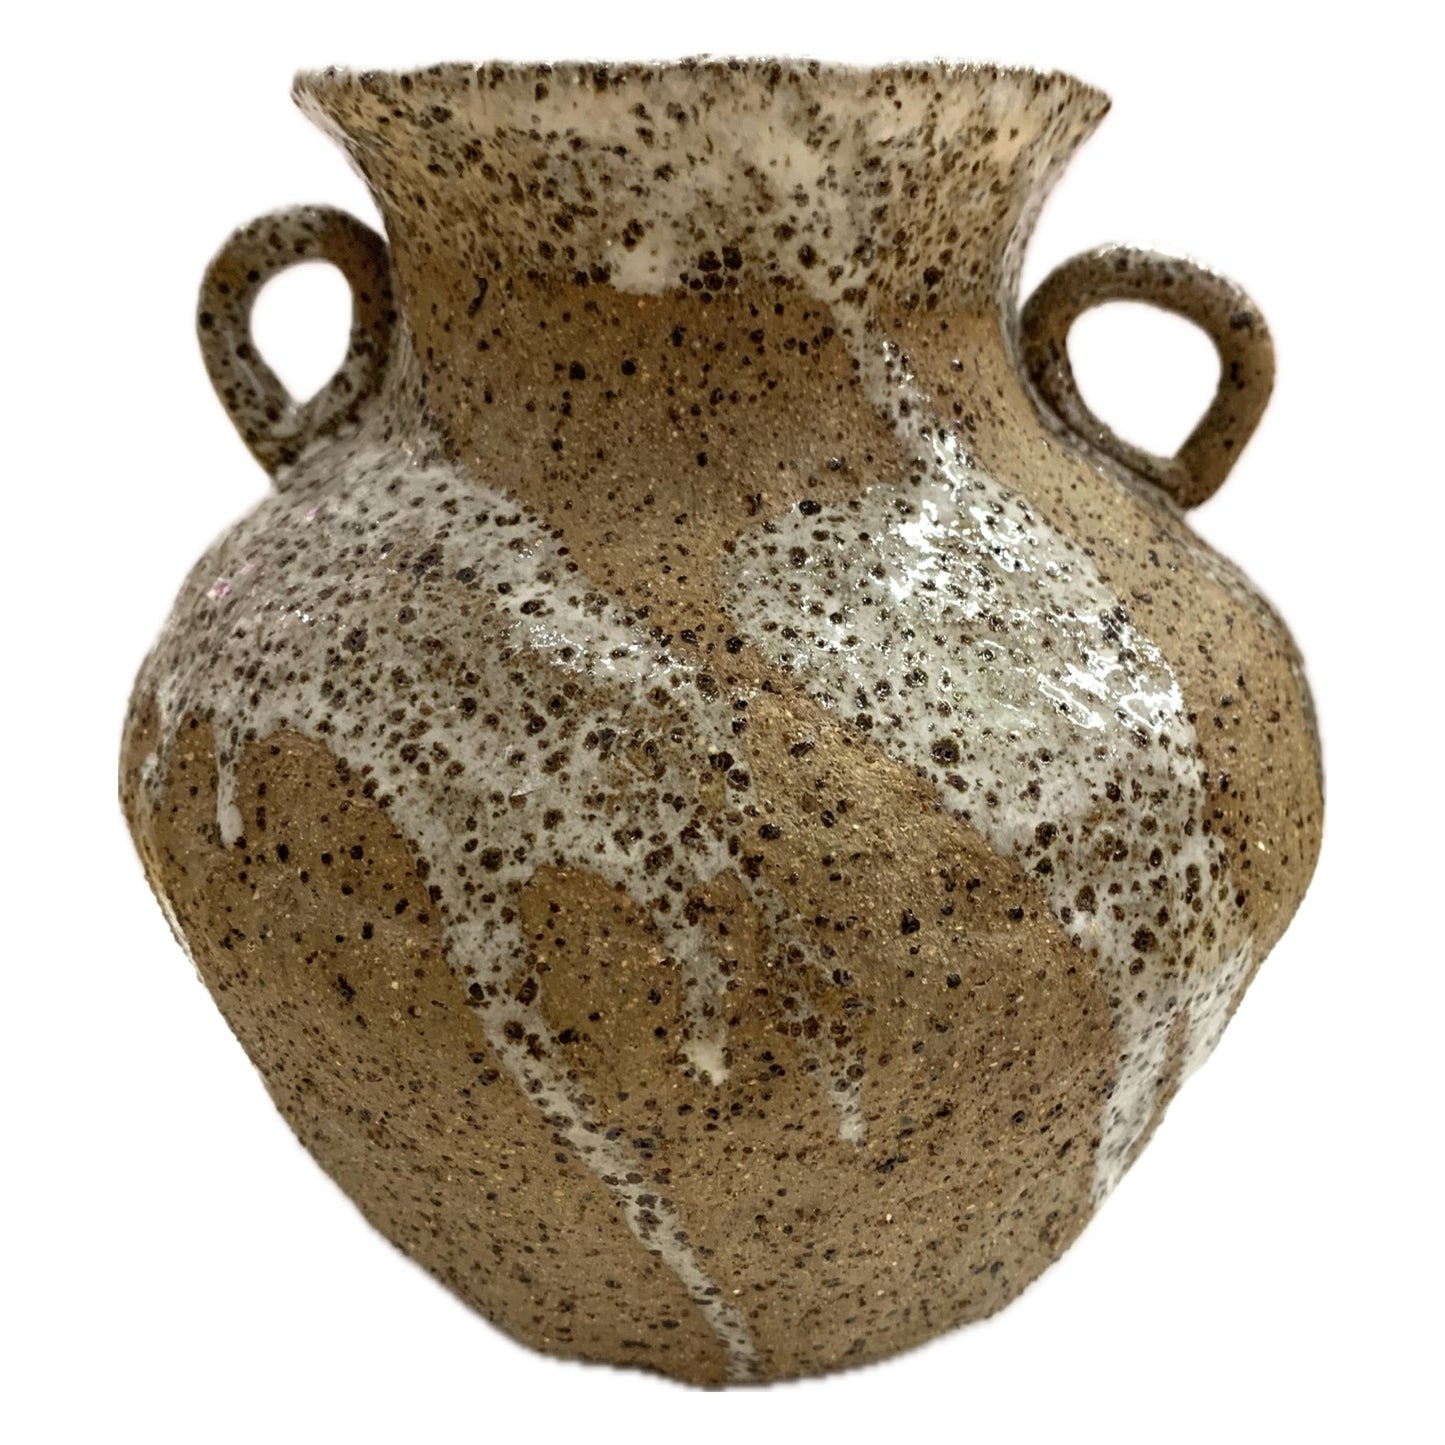 EARTH BY HAND- Urn Vases- Medium Dribbled White Glaze with Handles